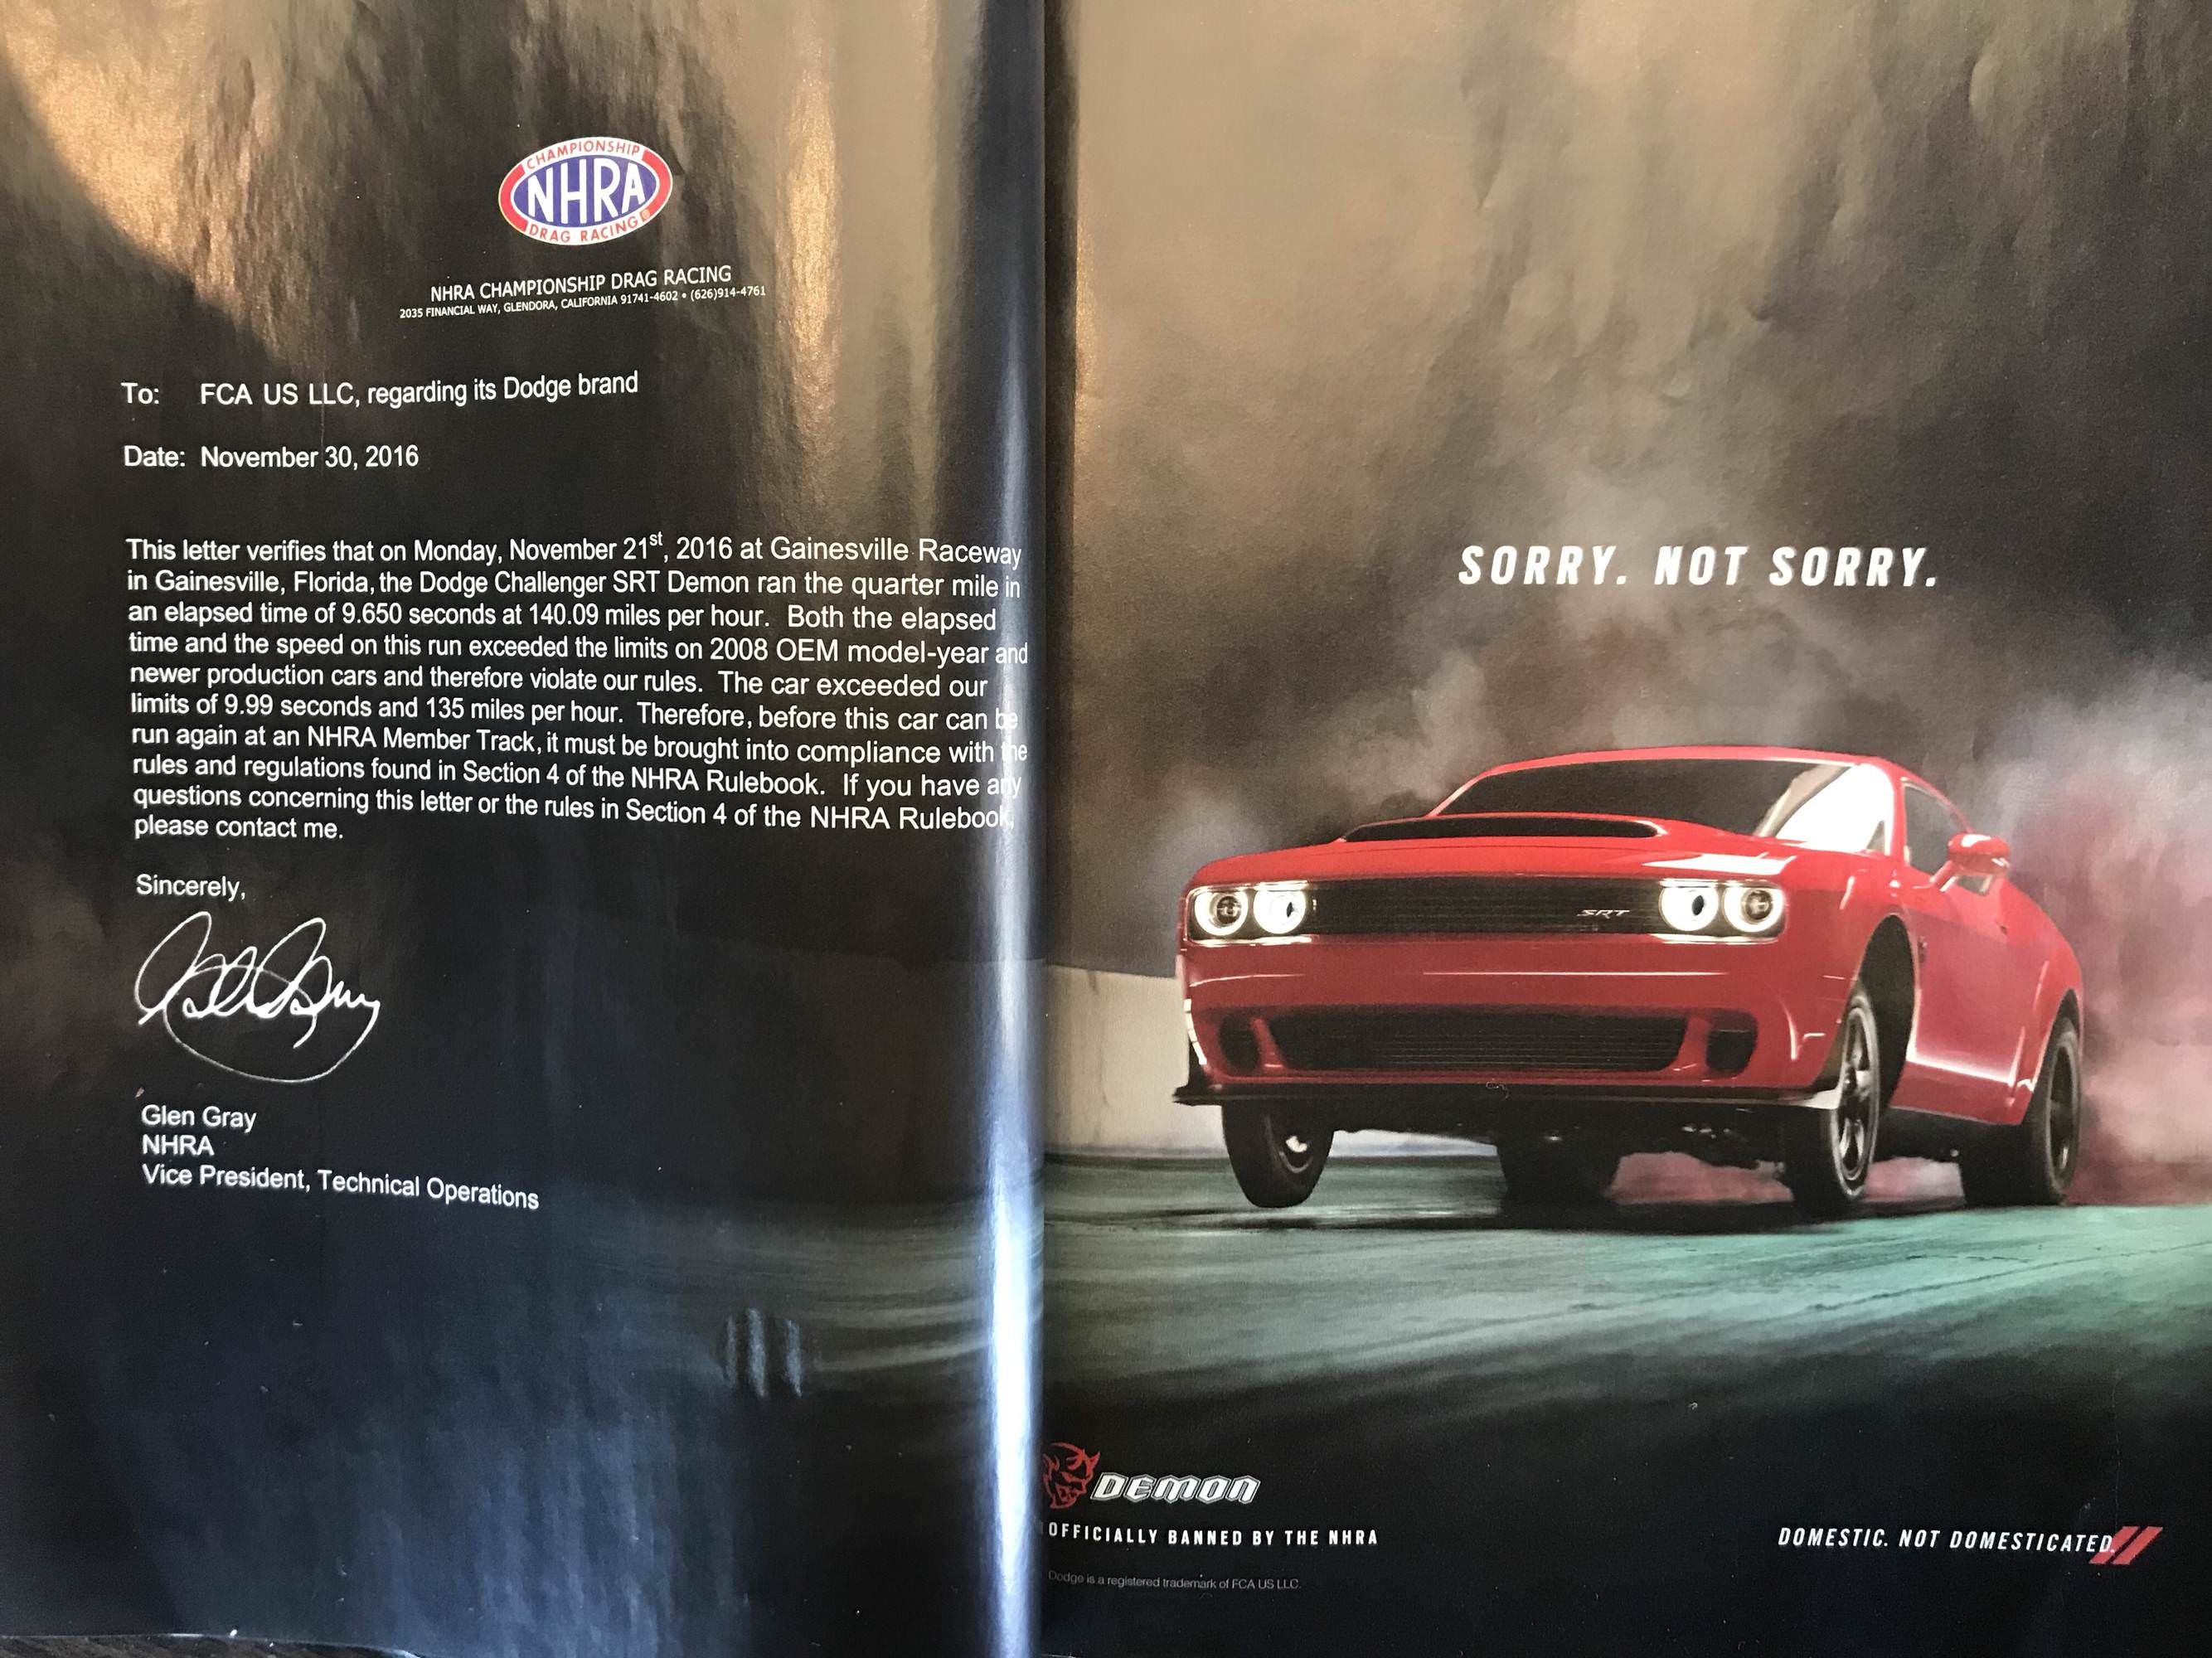 This ad for the New Dodge Demon is simply the letter from the NHRA telling them it’s too fast to be allowed.